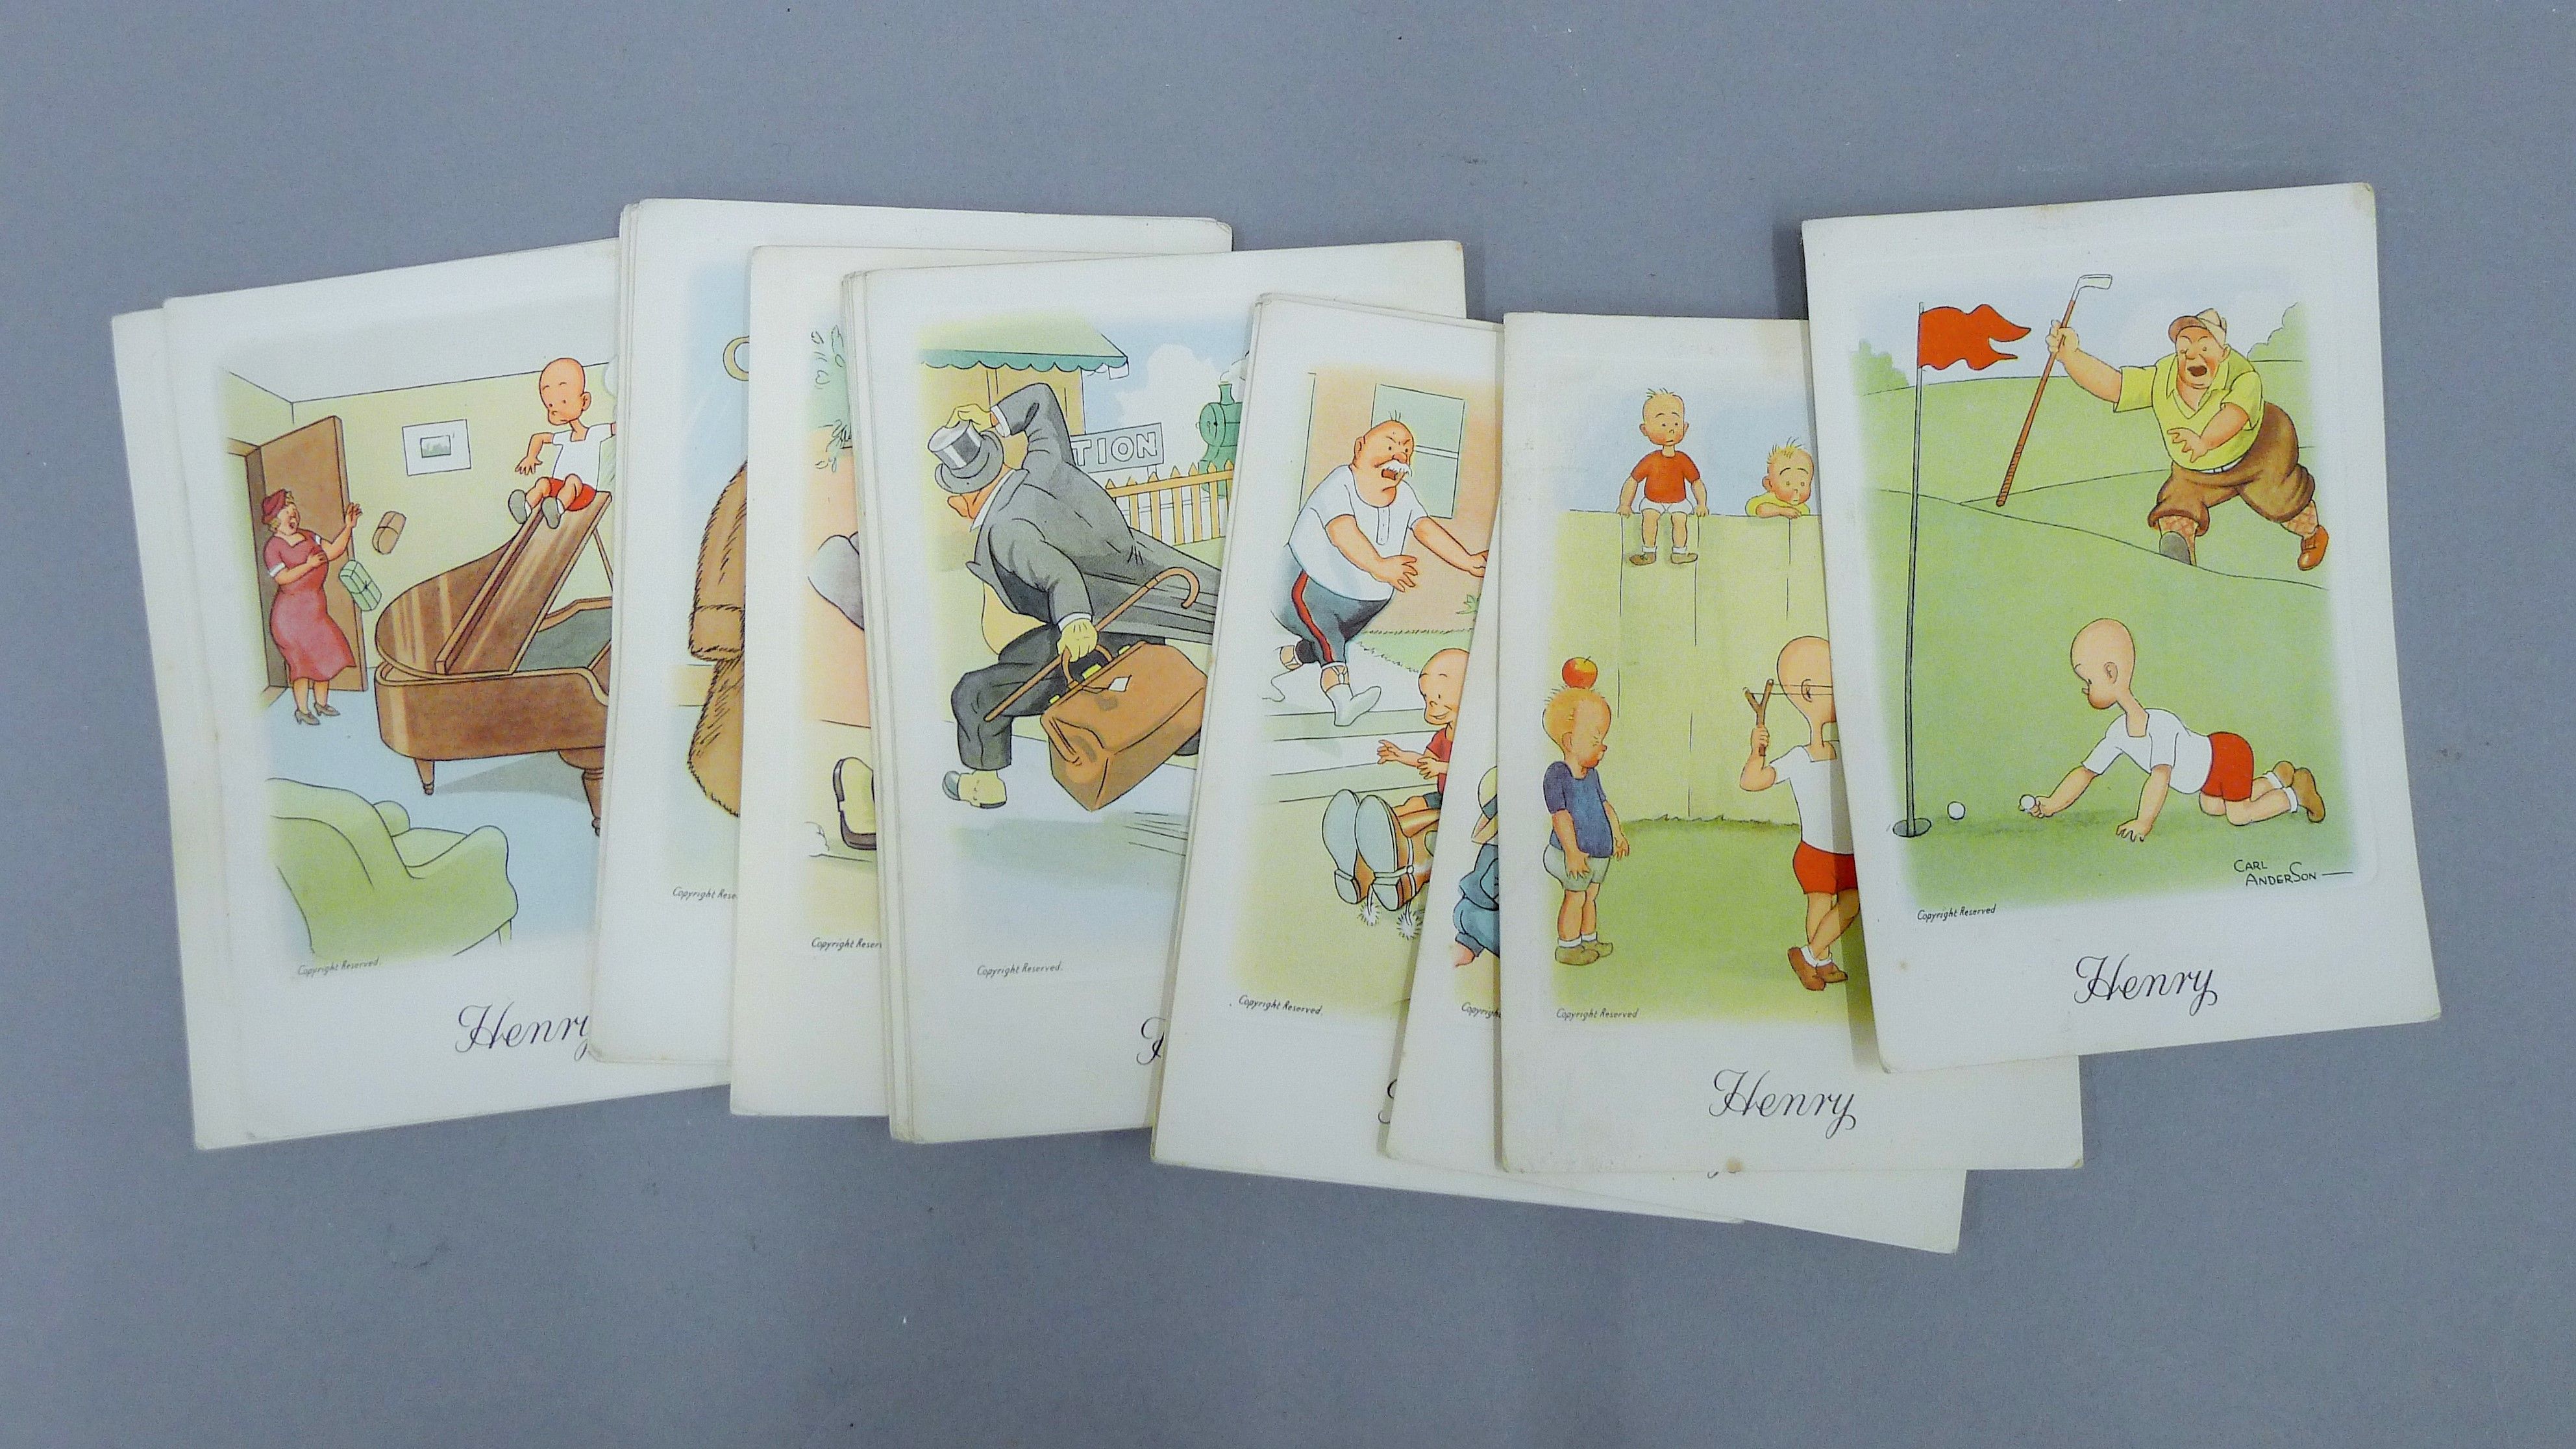 A quantity of Kensitas "Henry" cards by Carl Anderson. 10 x 14.5 cm .